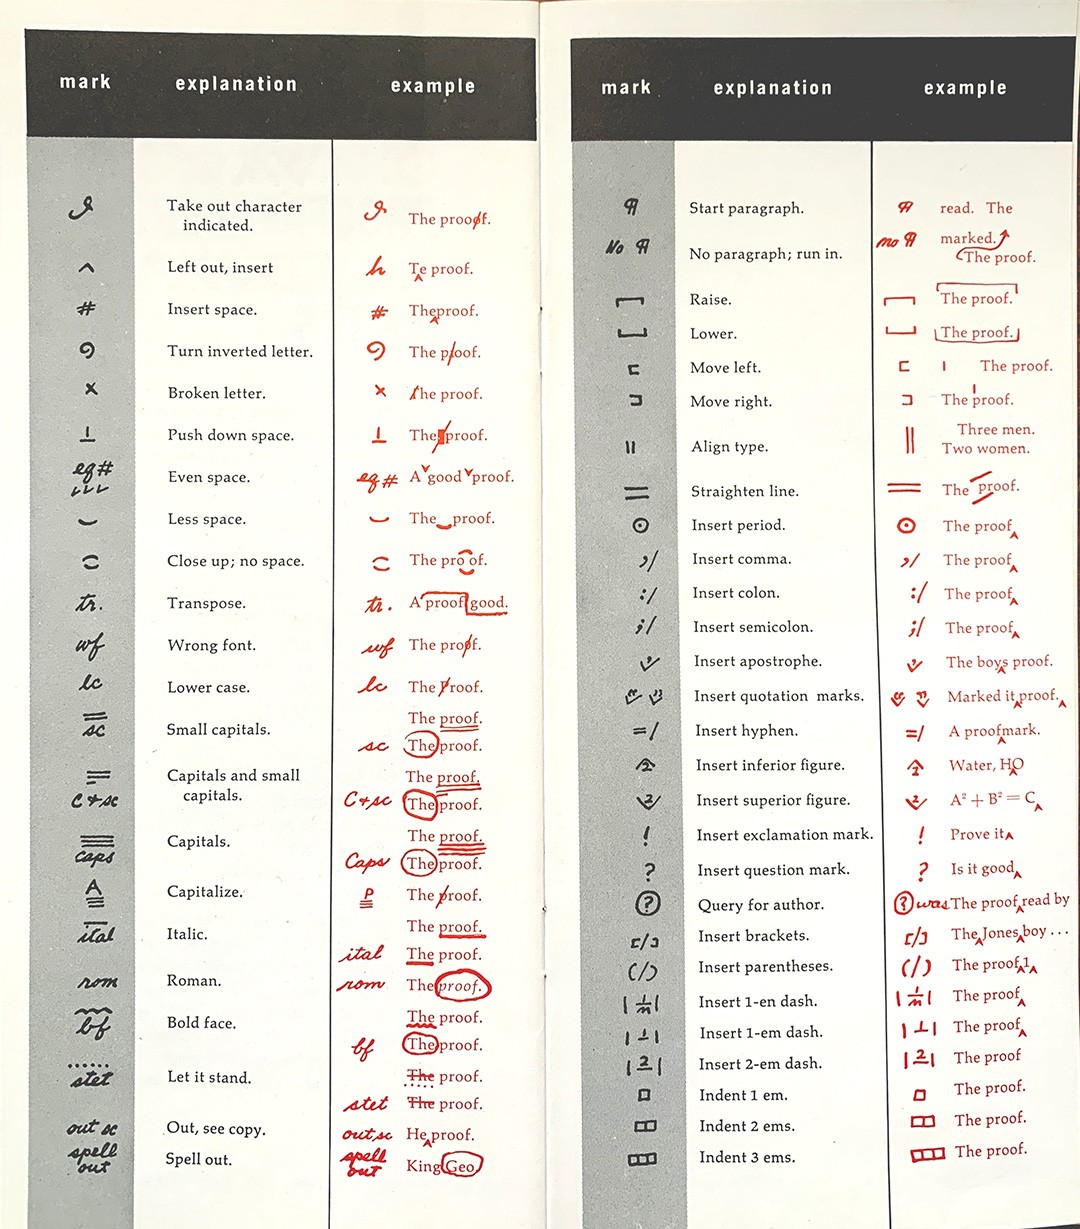 Proofreading symbols printed on these two pages of proofreaders' marks.